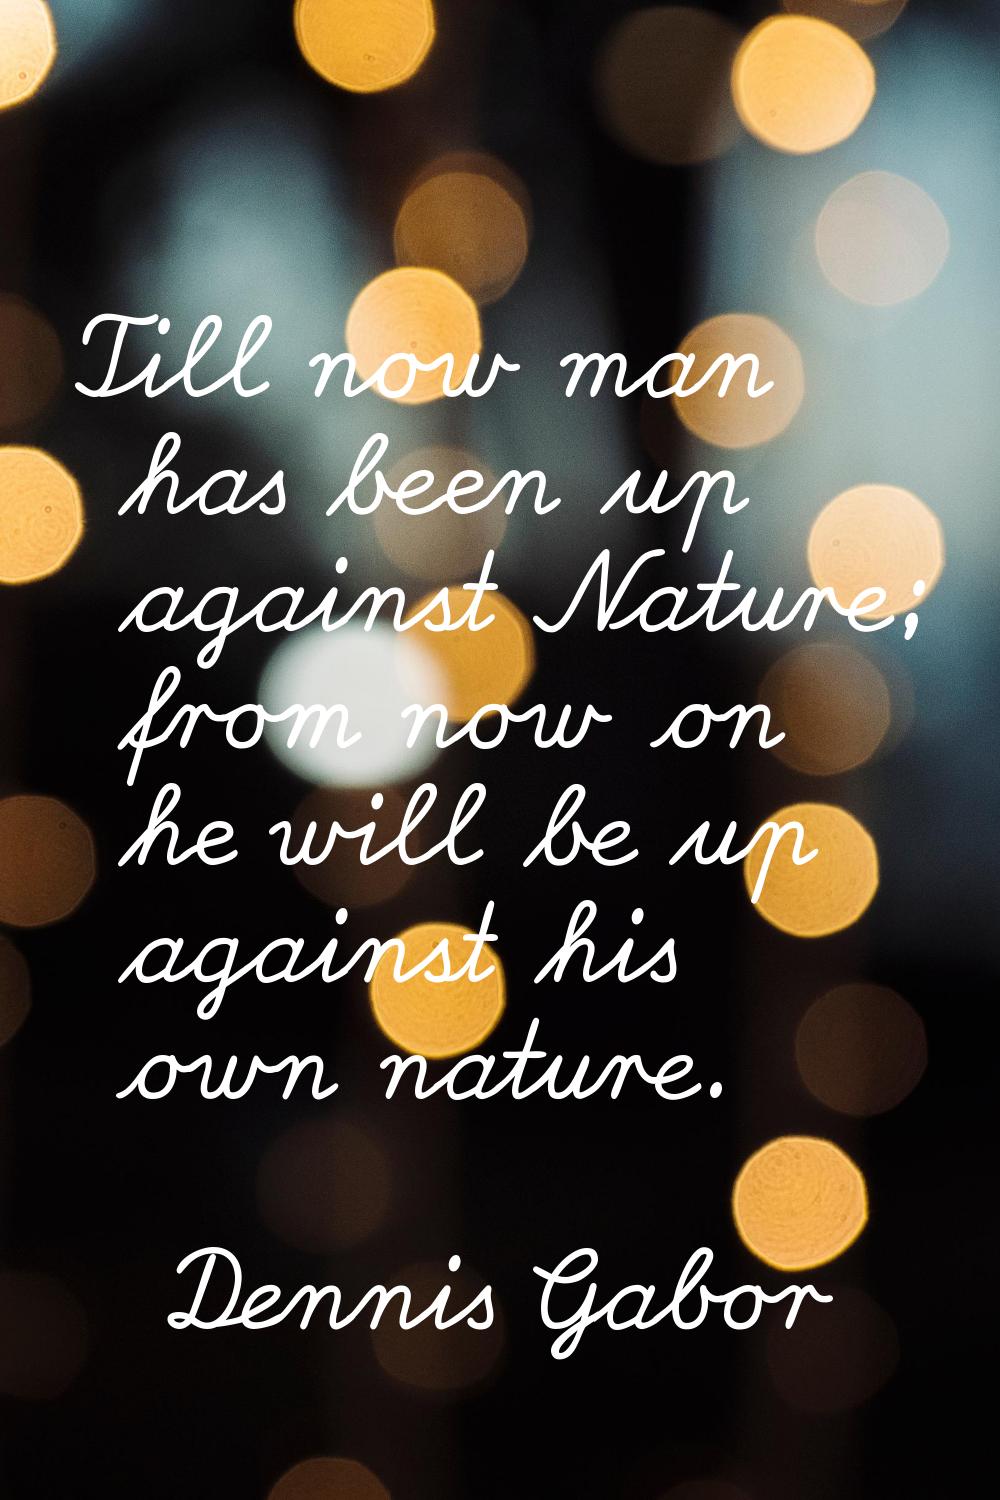 Till now man has been up against Nature; from now on he will be up against his own nature.